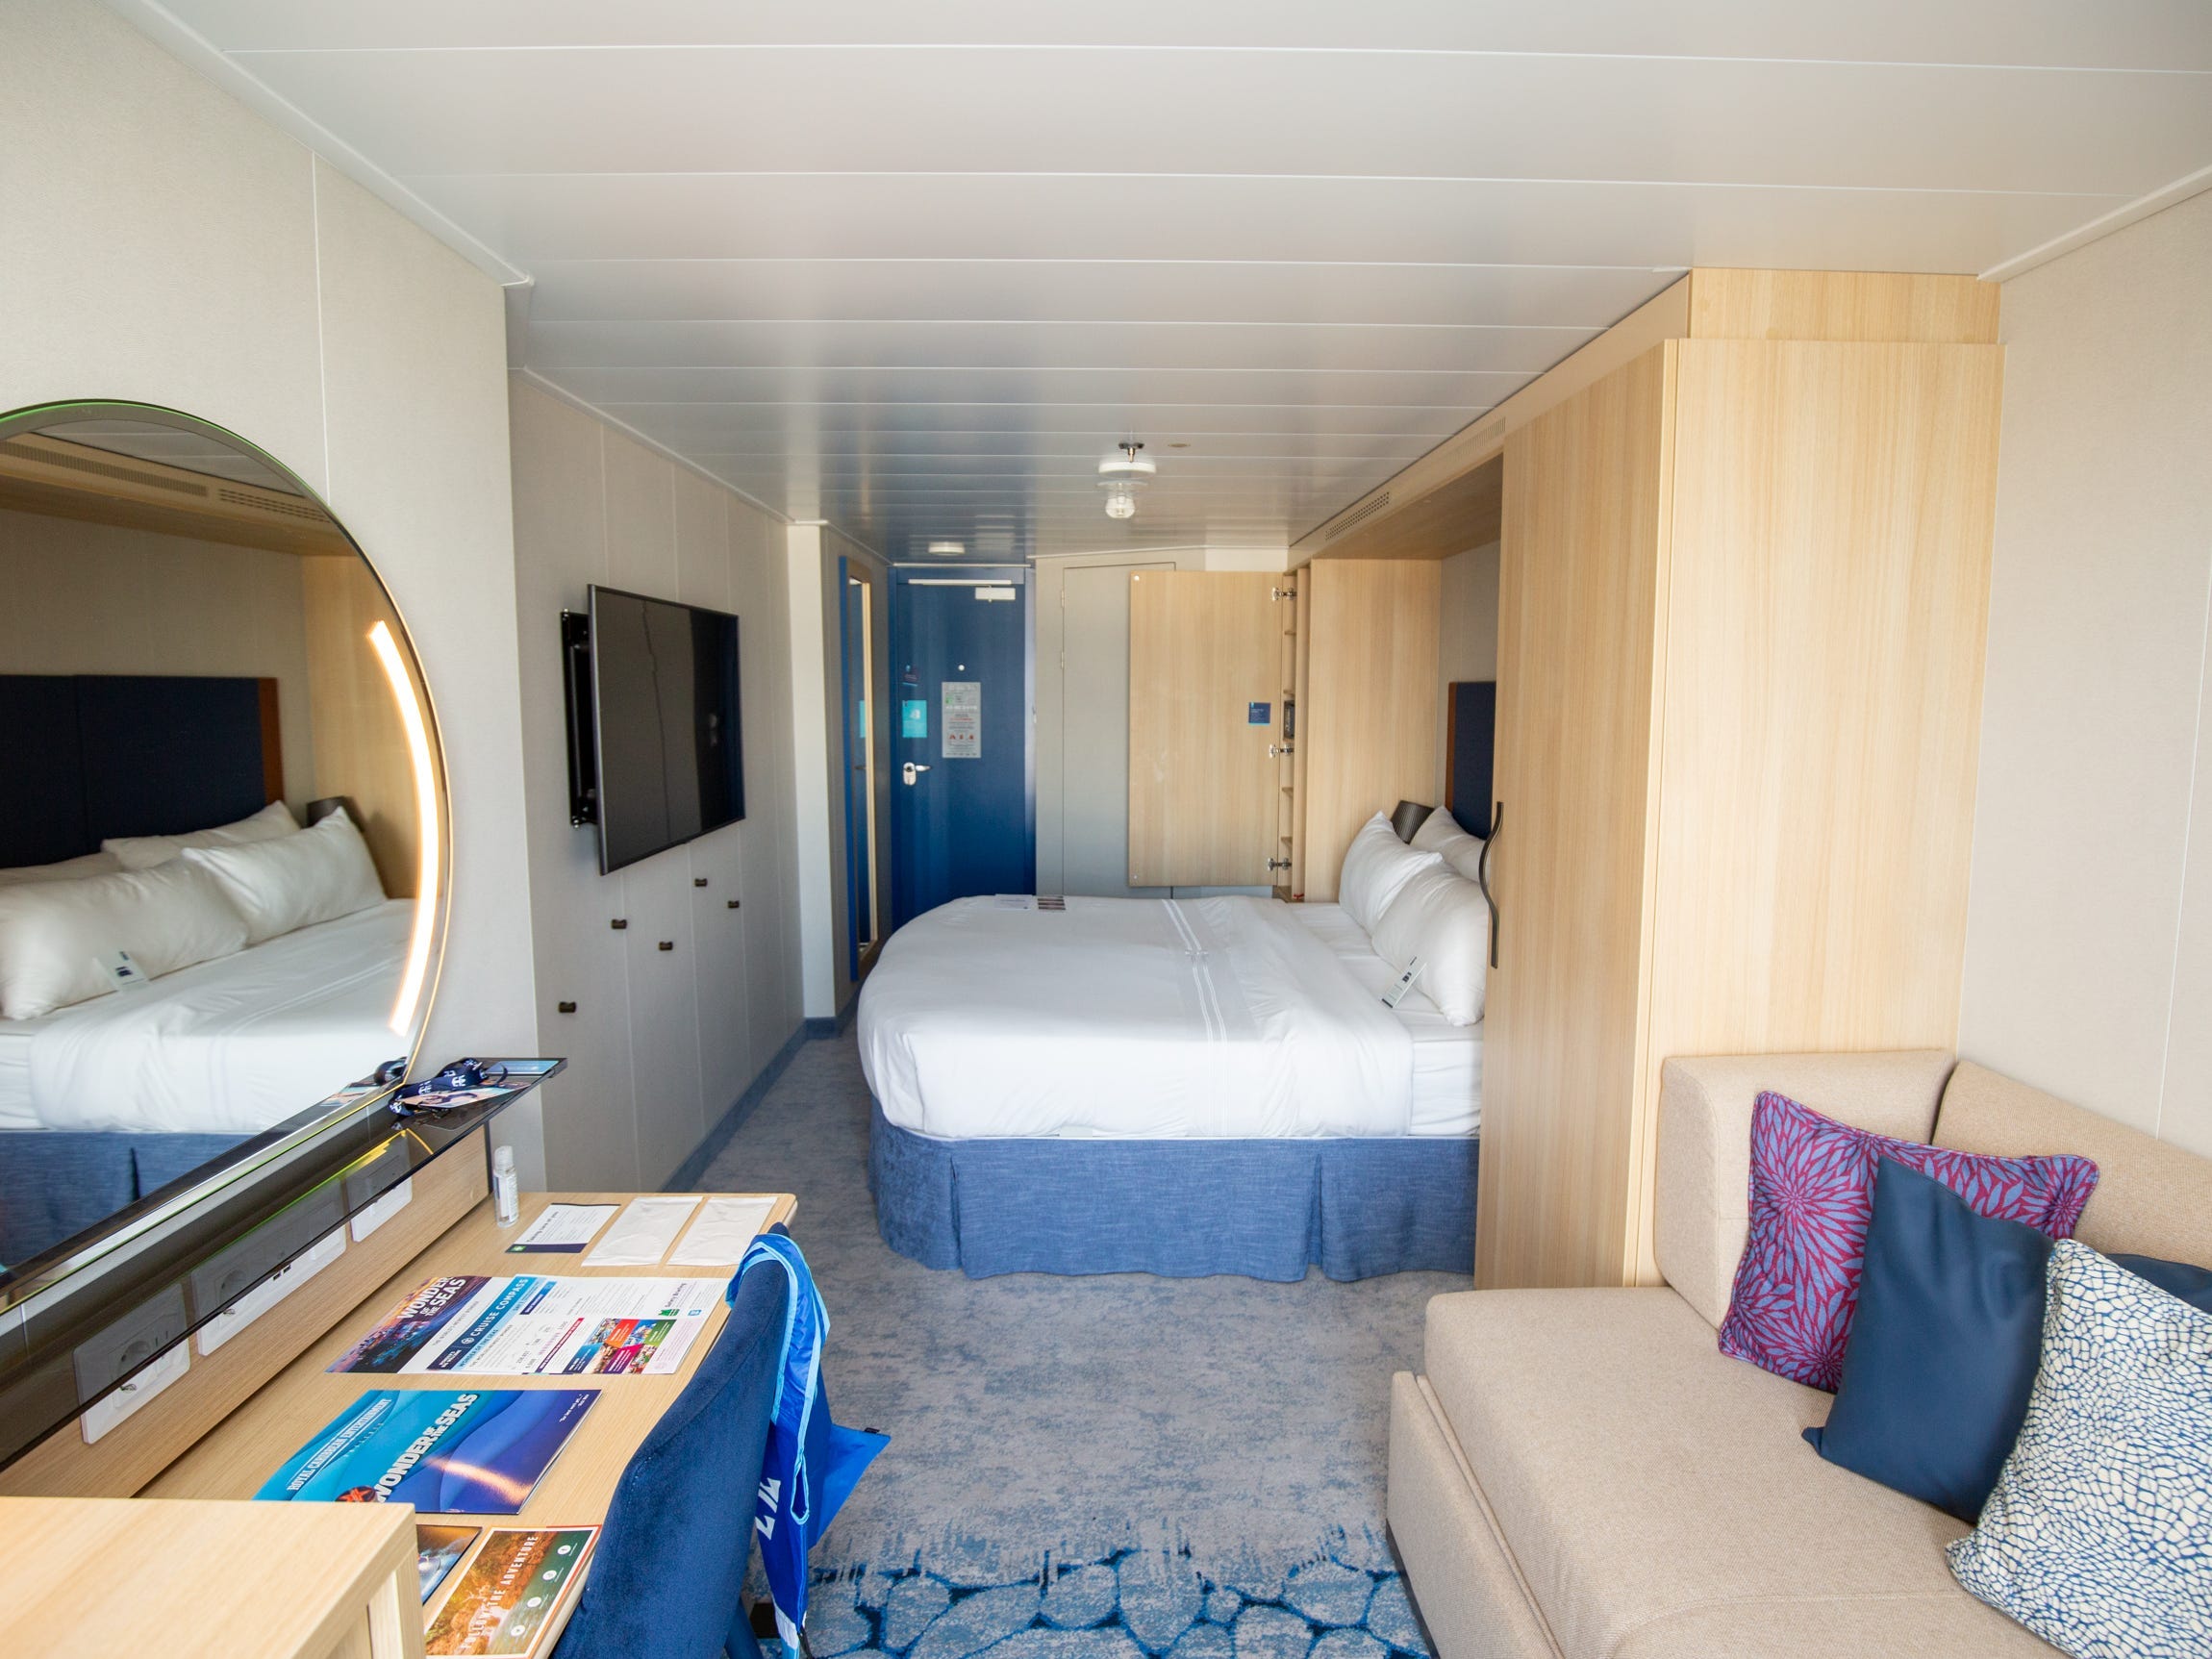 <ul class="summary-list"> <li>Royal Caribbean International invited me to spend two nights in a balcony stateroom on the Wonder of the Seas.</li> <li>The stateroom aboard the world's largest cruise ship will start at $1,400 per person in 2023.</li> <li>Take a tour of spacious my hotel room at sea complete with views of the ocean and two beds.</li> </ul><div class="read-original">Read the original article on <a href="https://www.businessinsider.com/balcony-stateroom-on-royal-caribbeans-wonder-of-the-seas-cruise-2022-12">Business Insider</a></div>